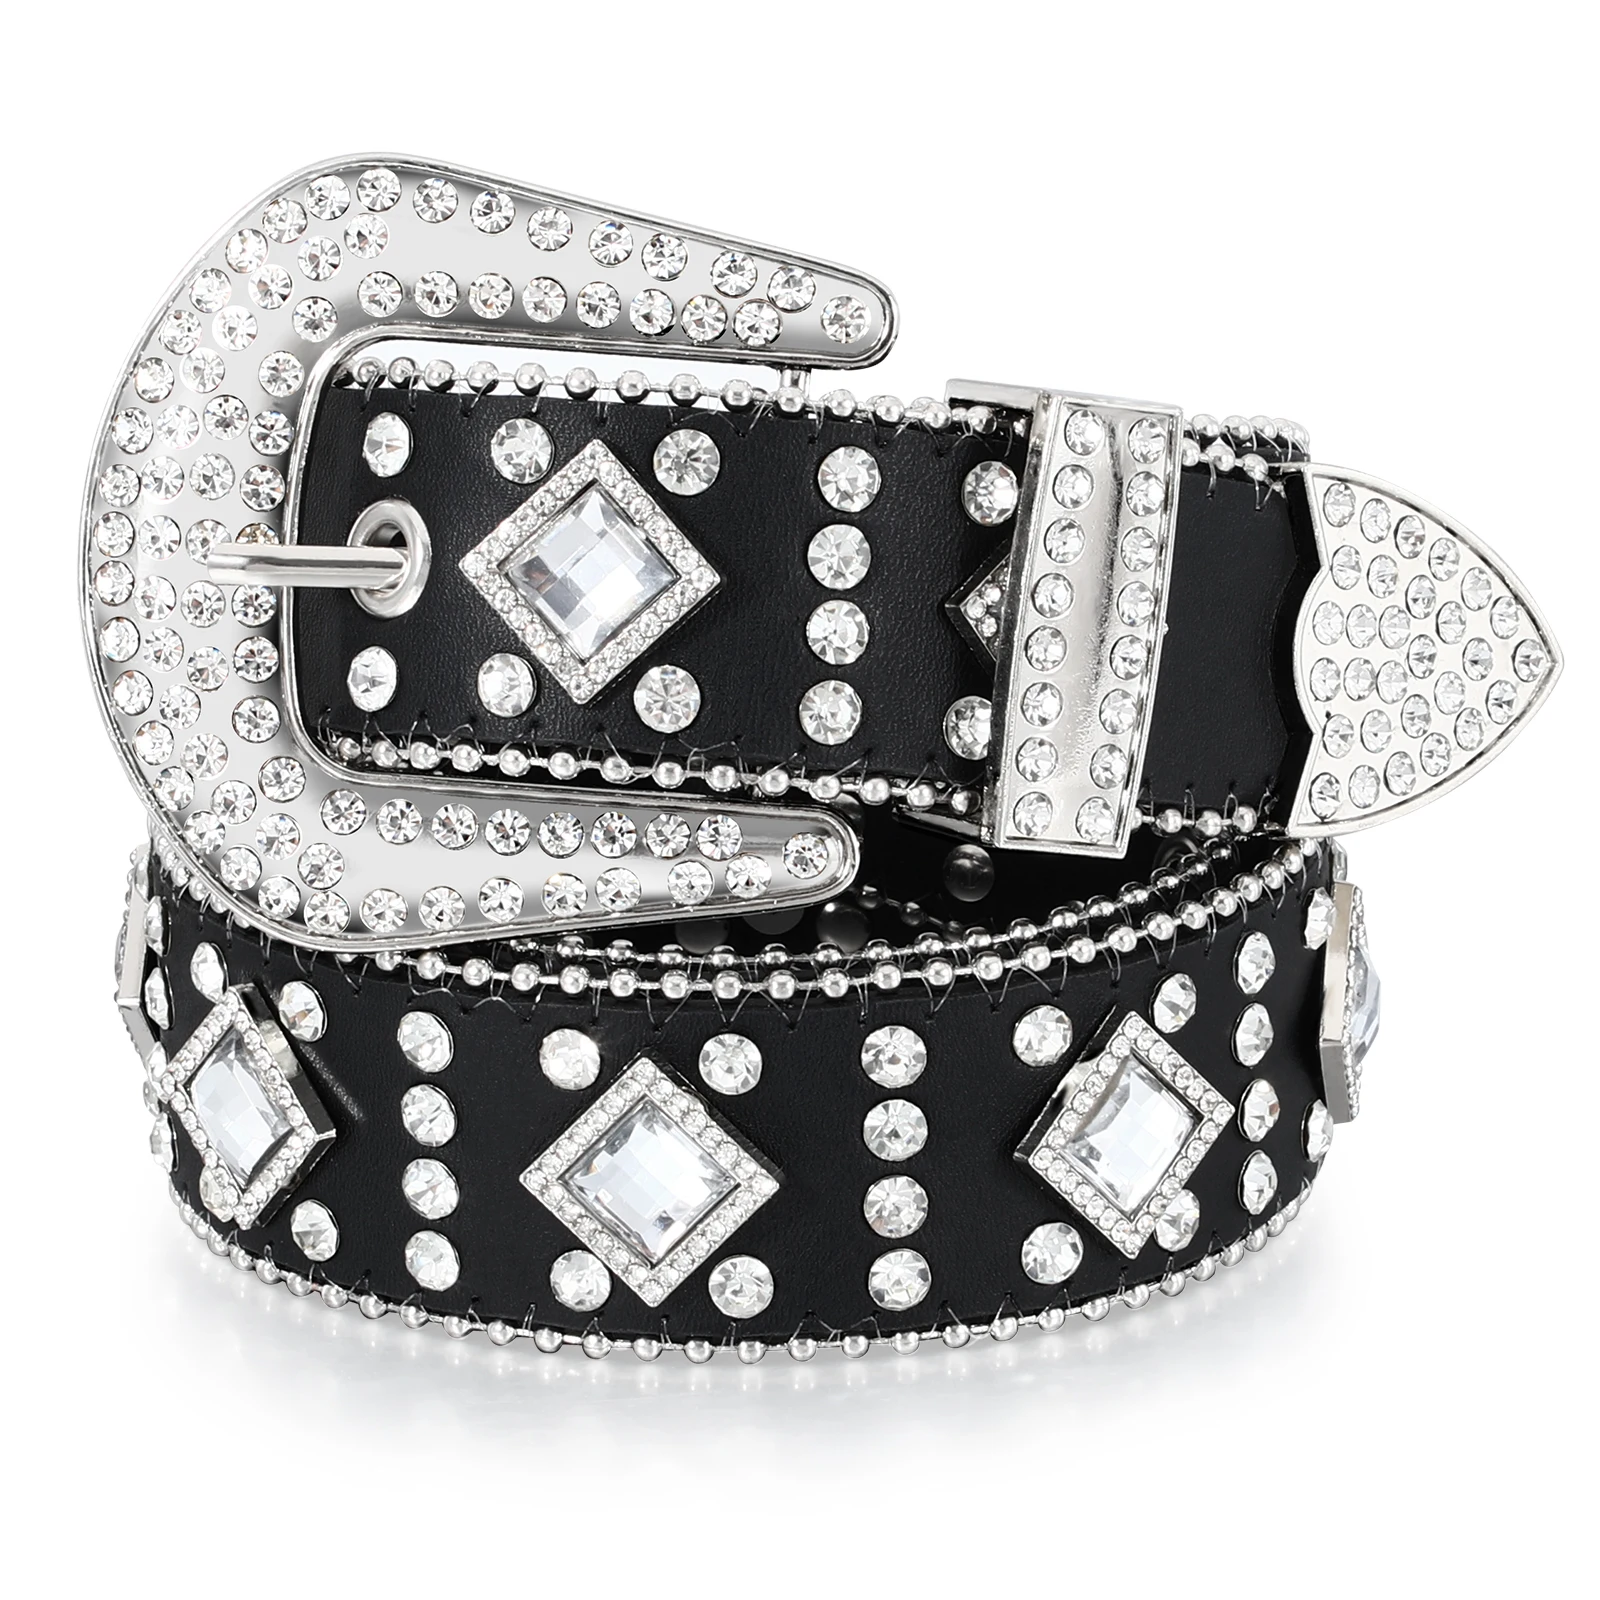 

BB New Fast Delivery Luxury Crystal Men Cowboy Belt Diamond Studded Rhinestone Belts Western Sparkle country Leather Belts